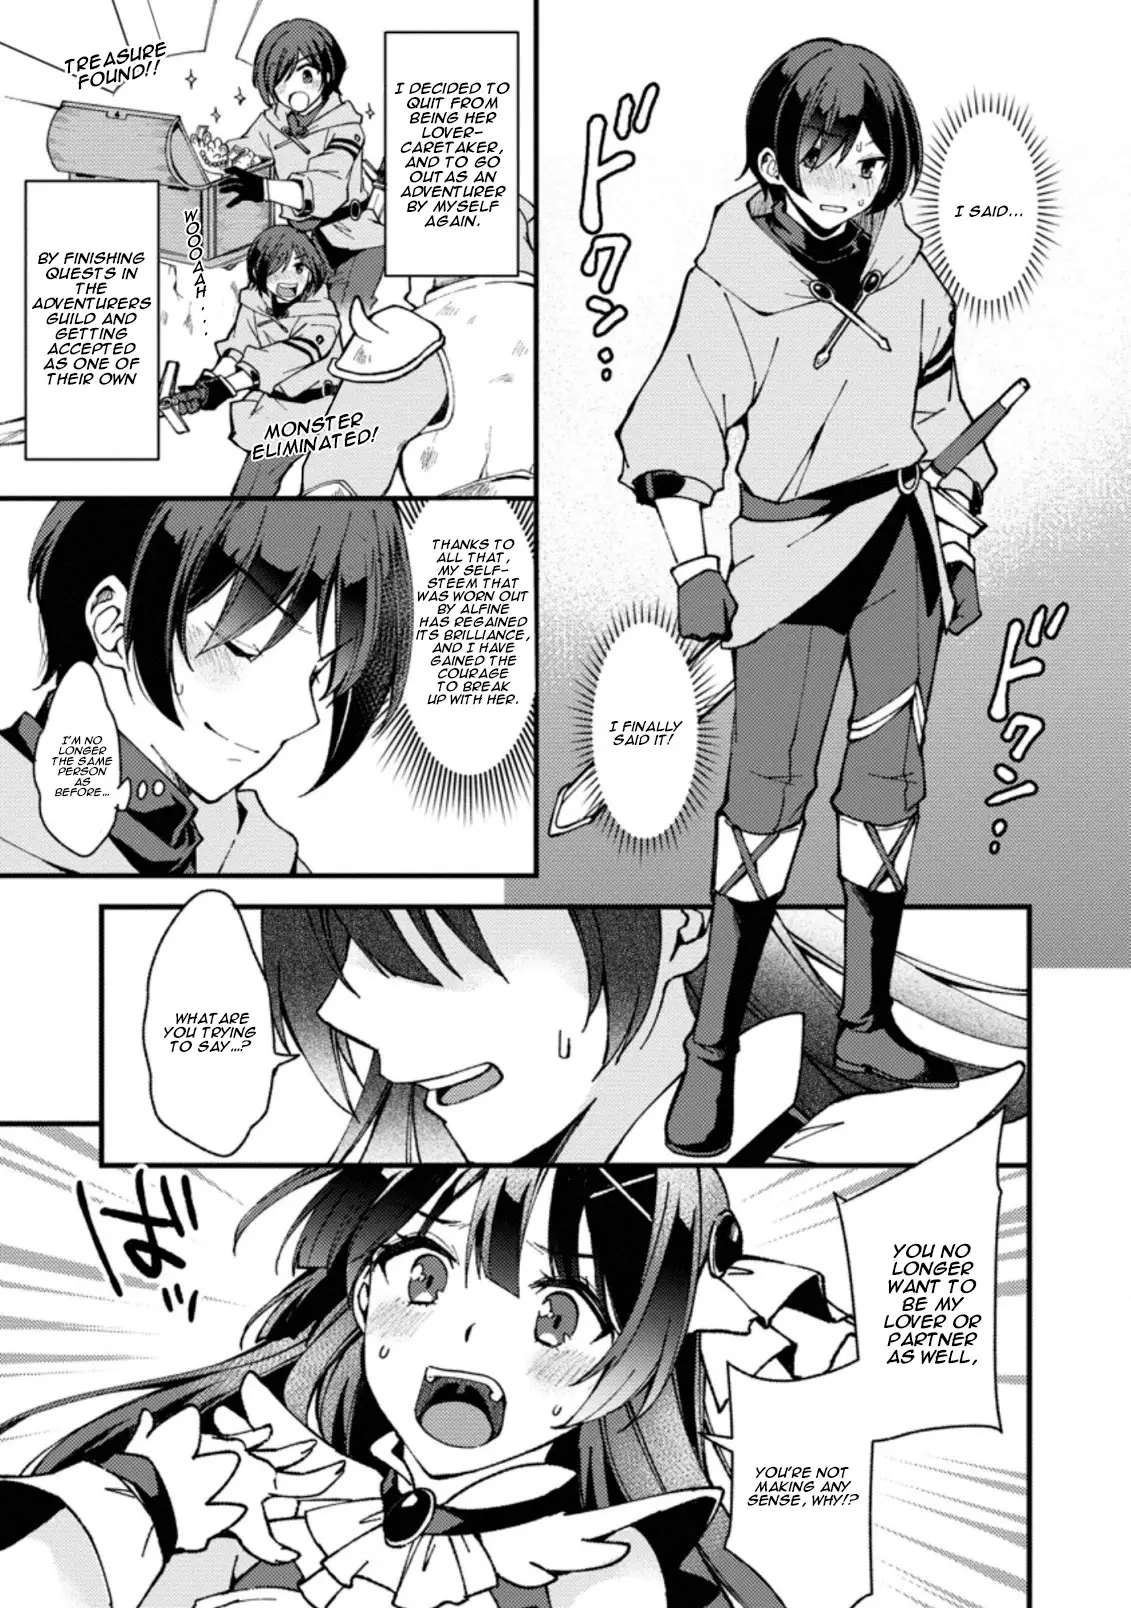 A Sword Master Childhood Friend Power Harassed Me Harshly, So I Broke Off Our Relationship And Make A Fresh Start At The Frontier As A Magic Swordsman. - 1 page 10